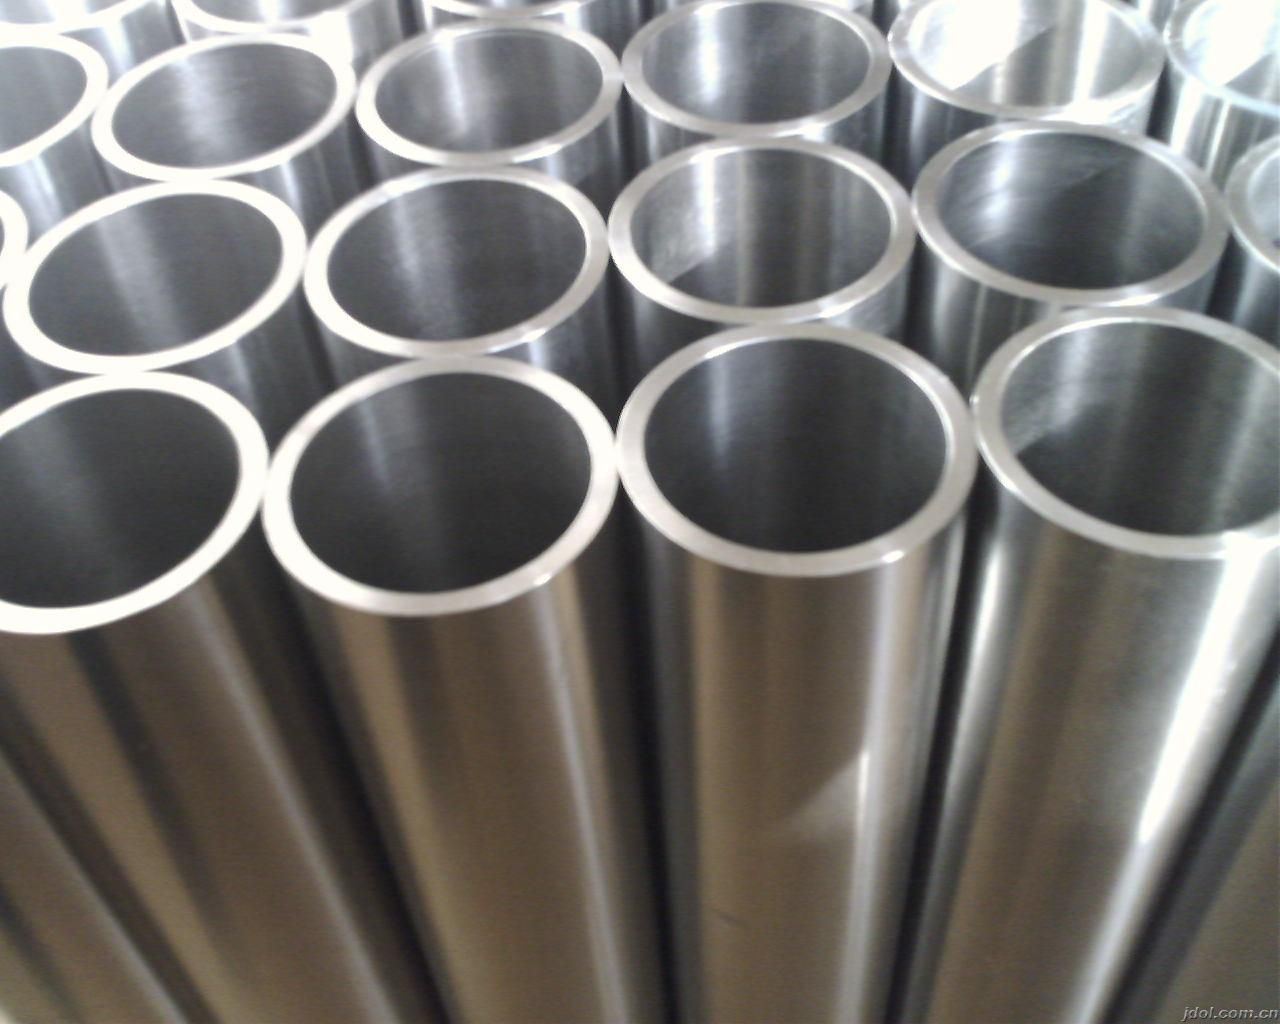 Metal Building Stainless Steel Pipe Fitting